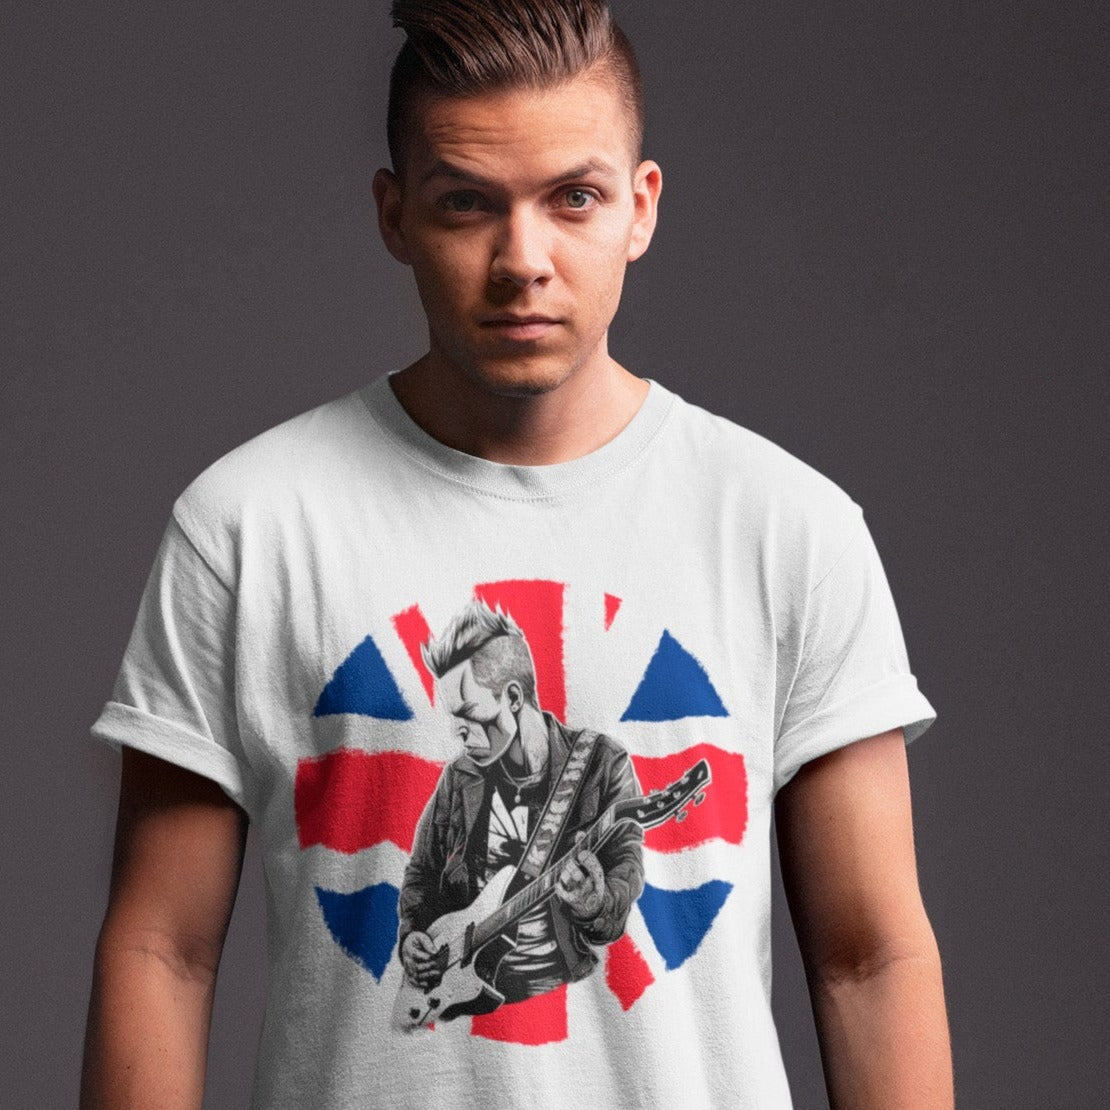 union-jack-black-punk-t-shirt--mockup-of-a-young-man-with-a-trendy-haircut